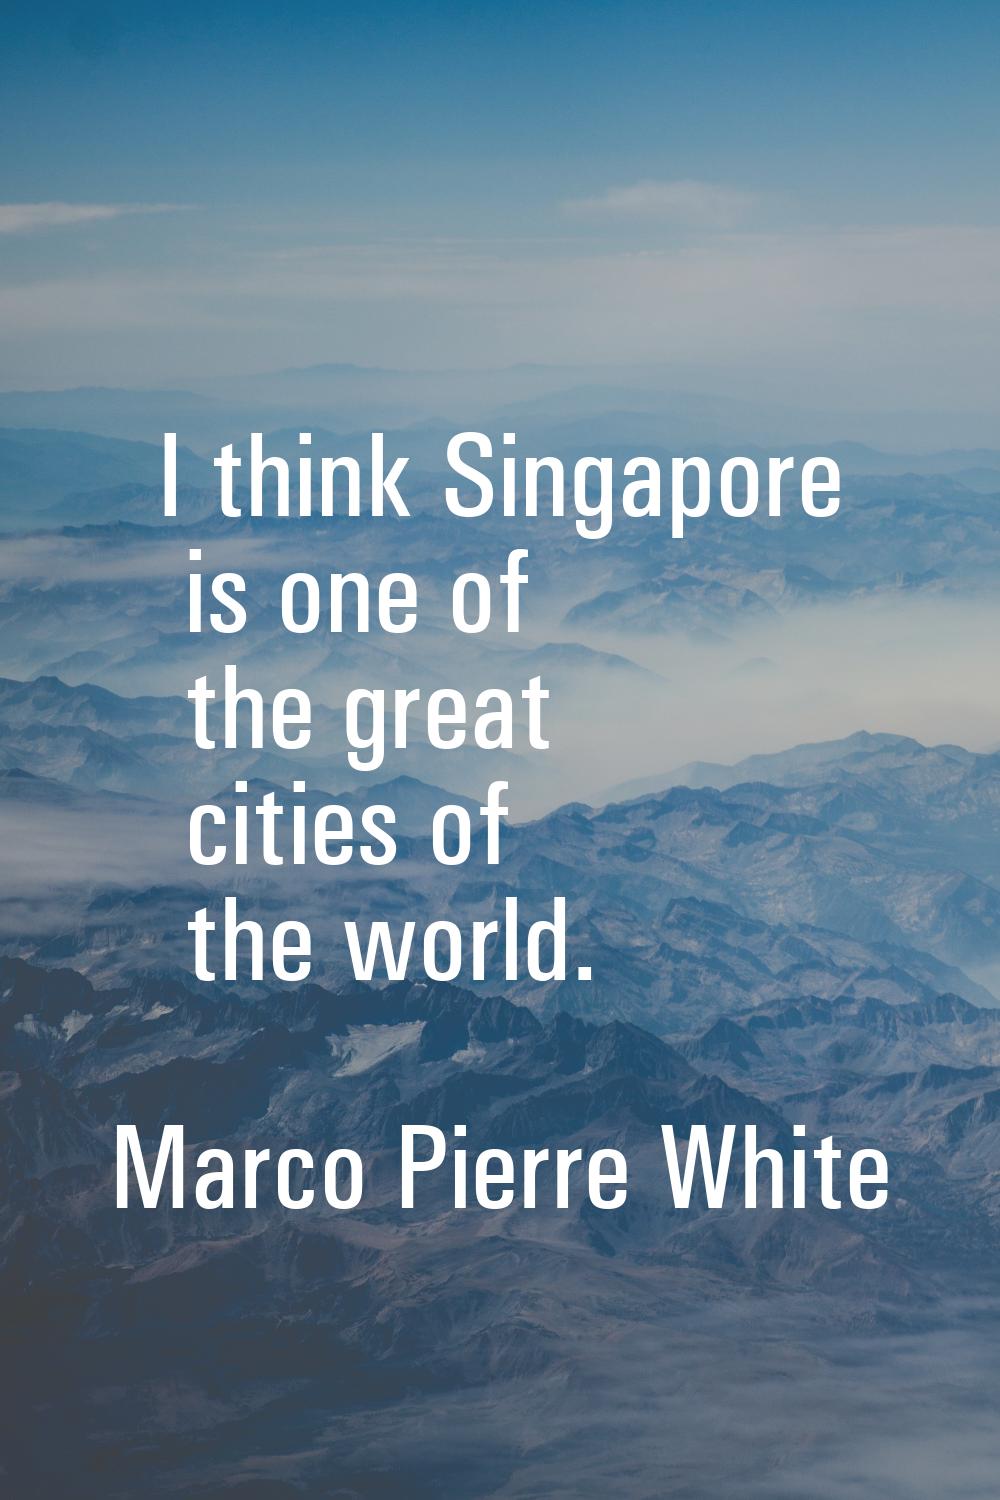 I think Singapore is one of the great cities of the world.